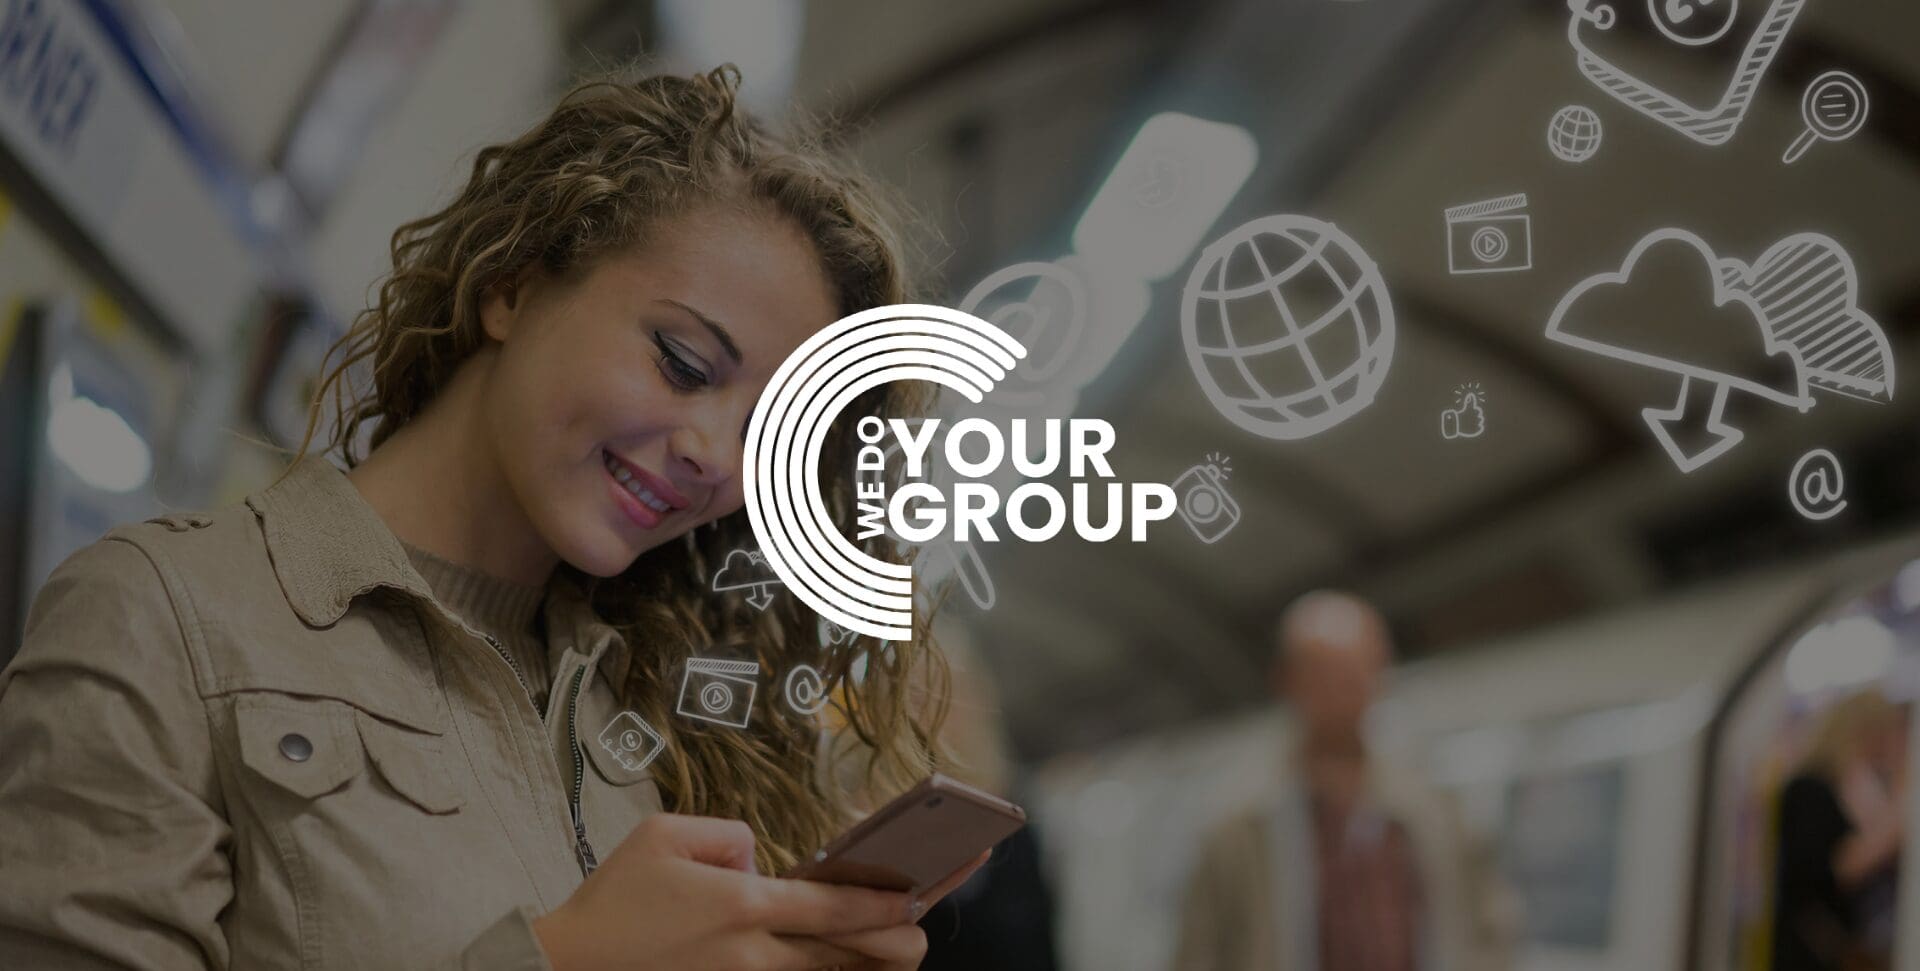 WeDoYourGroup white logo on background of young woman smiling at mobile phone